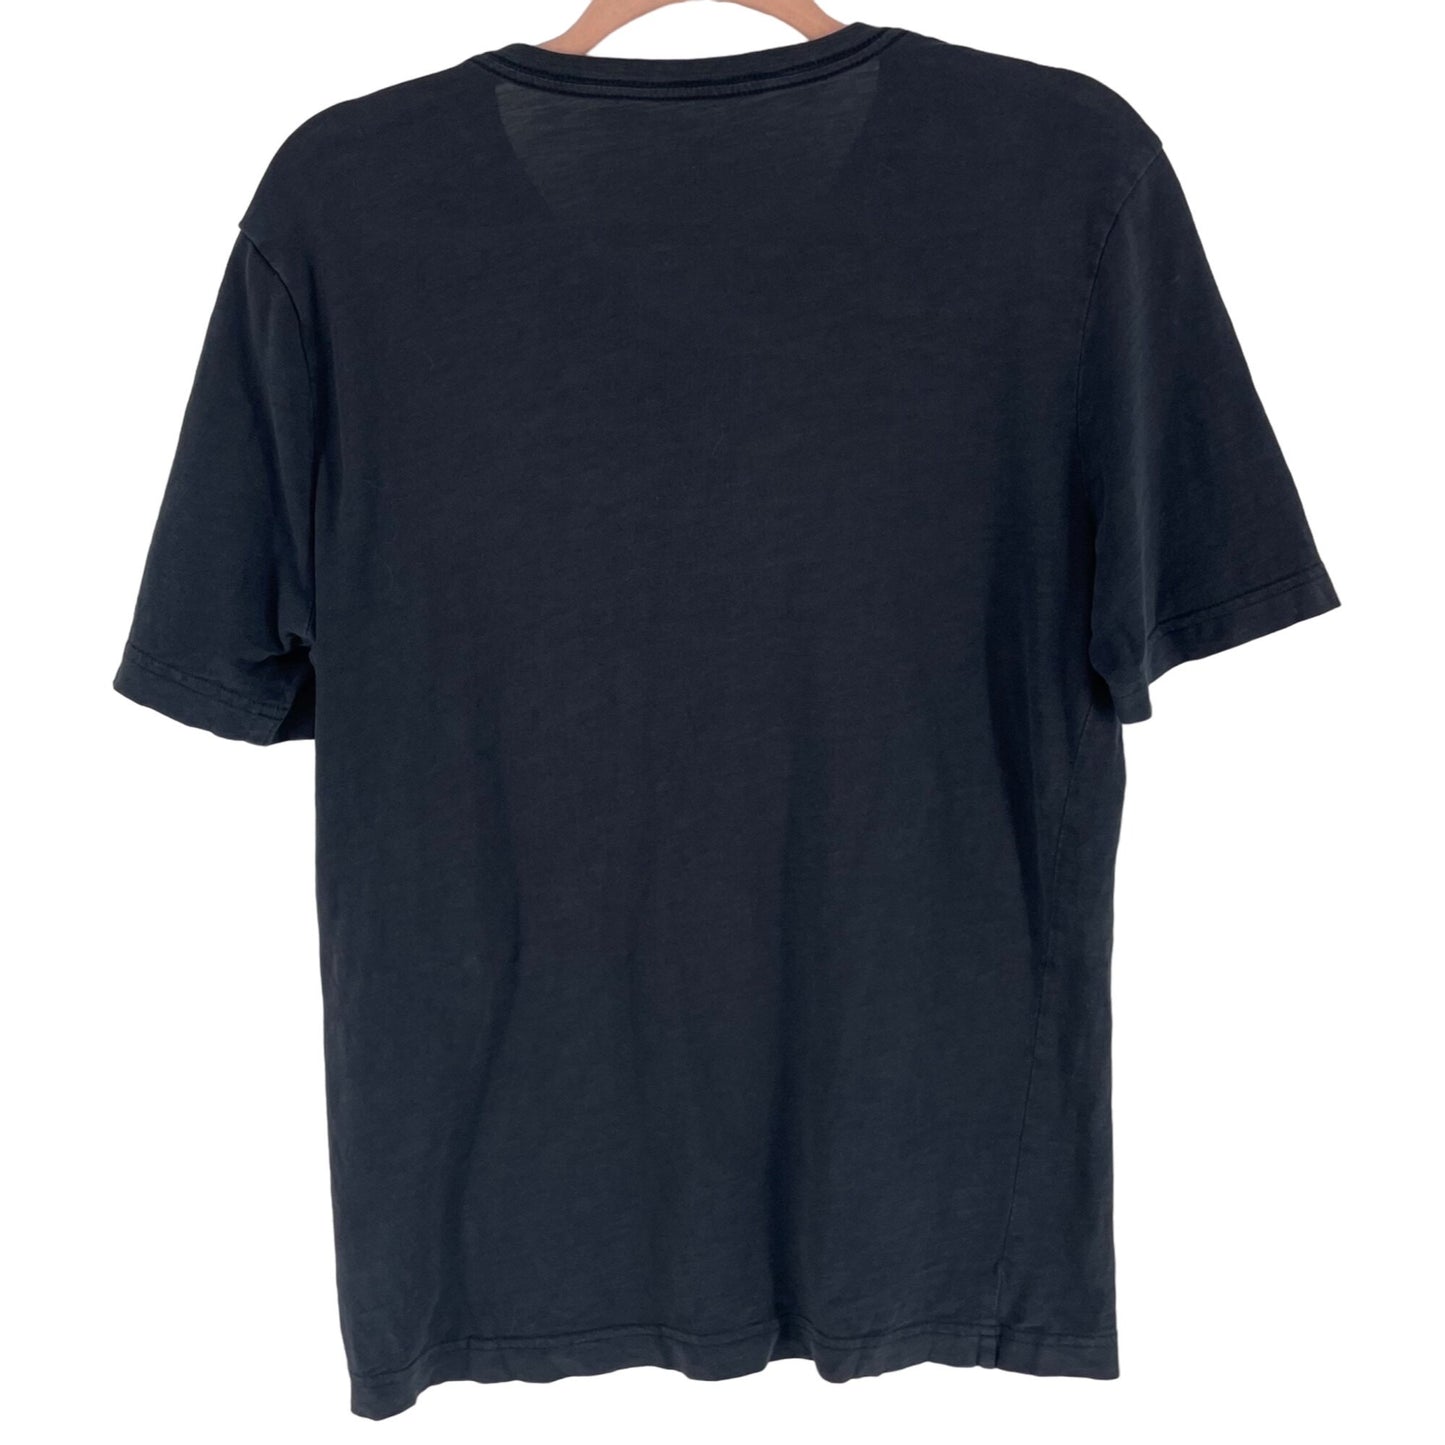 CLEARANCE H&M Men's Size Small Navy T-Shirt